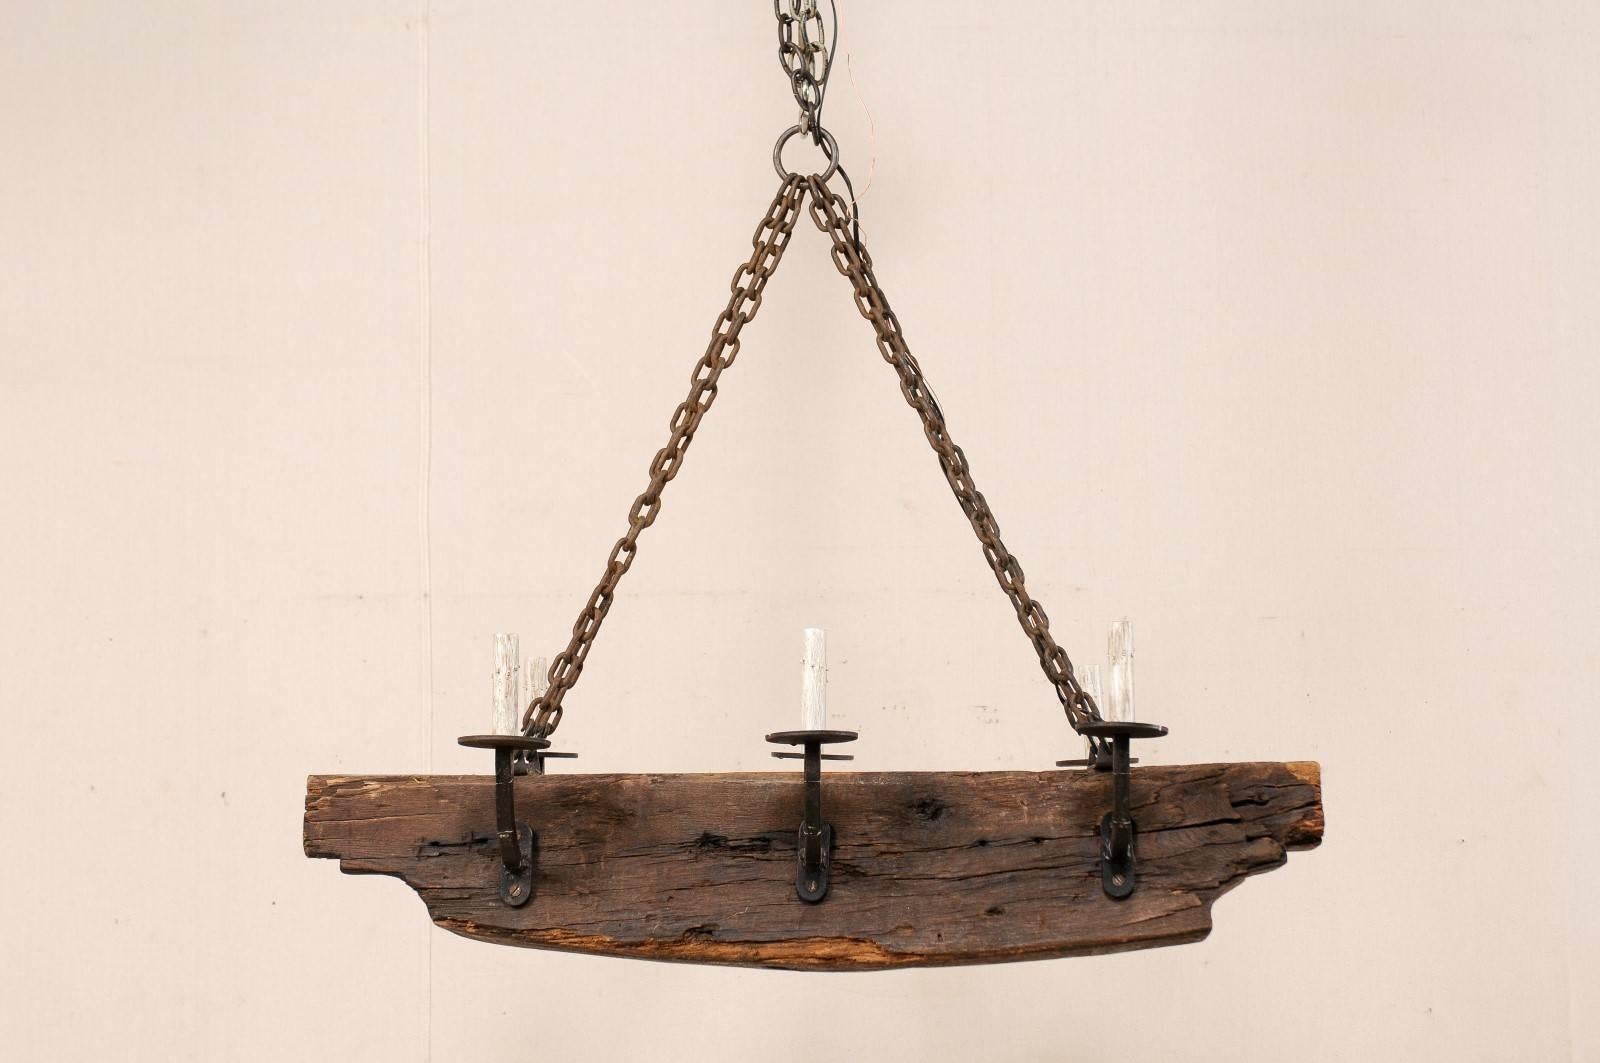 French Rustic Wood Beam Chandelier with Six Forged Iron Arms, Mid 20th C. For Sale 2